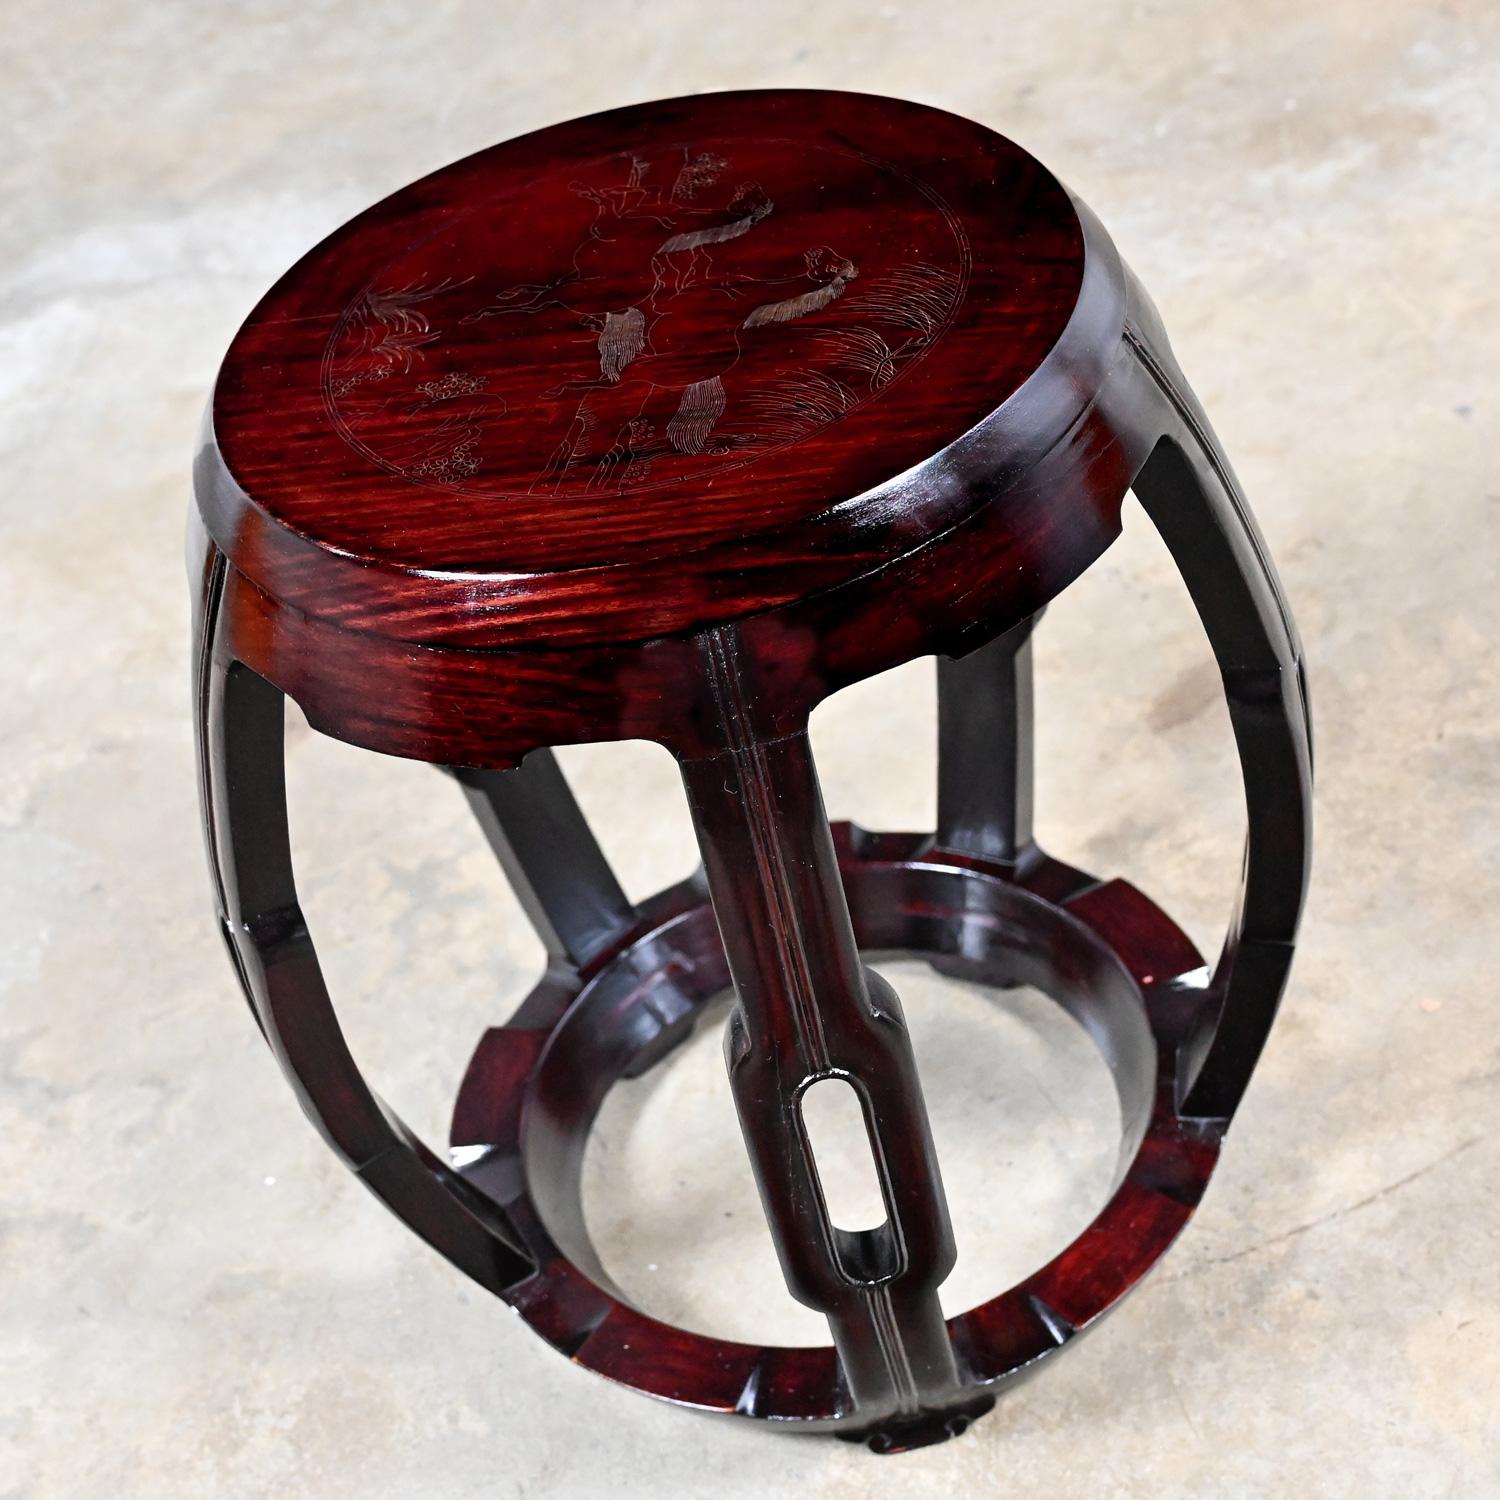 Mid 20th Century Chinoiserie Asian Rosewood Barrel Drum Table or Garden Stool For Sale 2